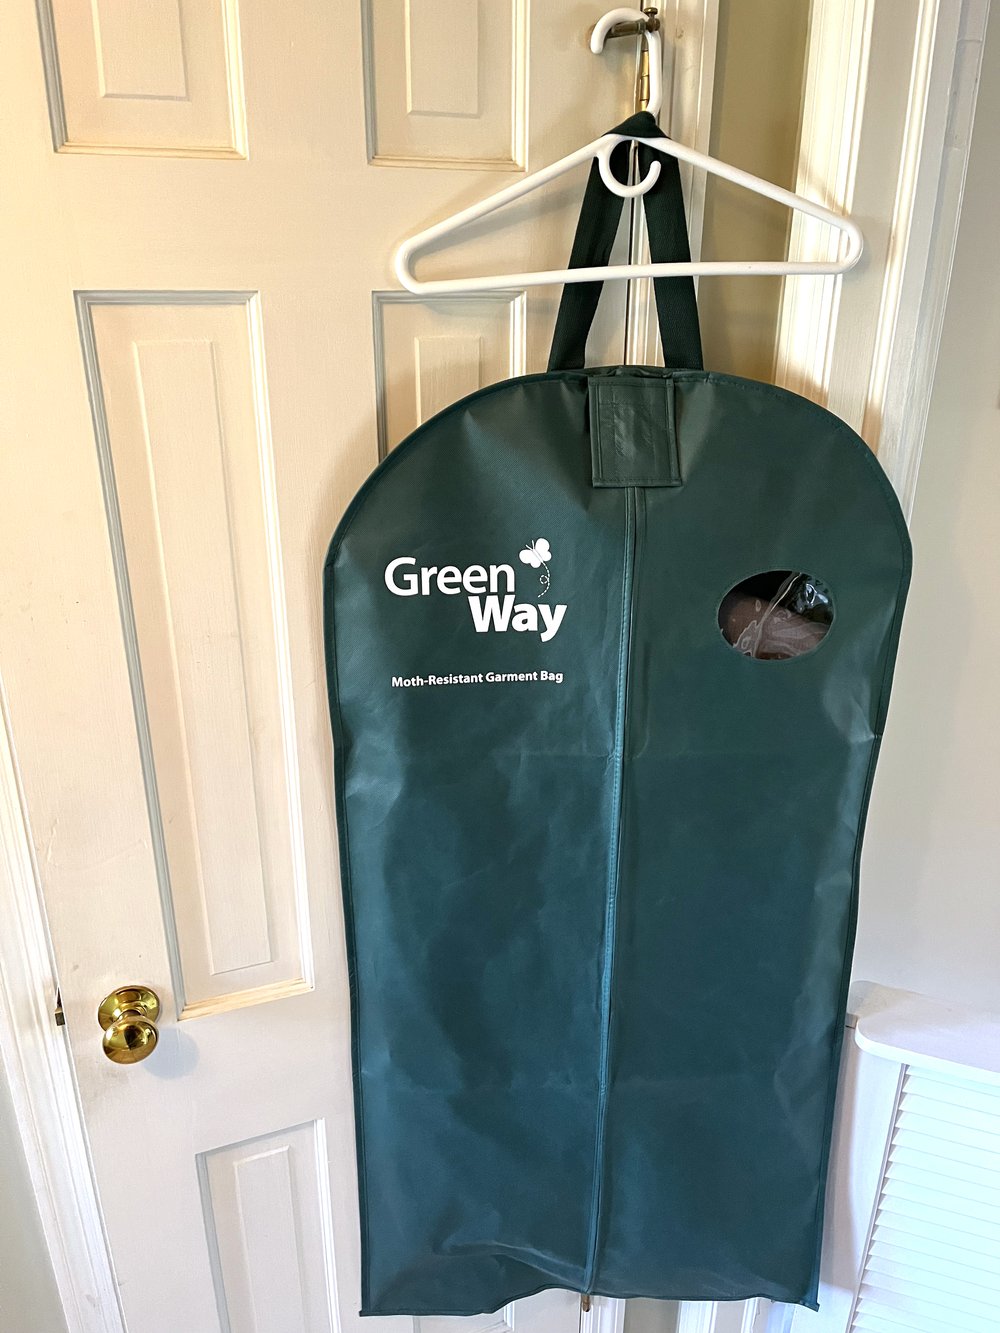 Greenway Clothing Moth Traps (12 Traps) - Moth Traps for Clothes Closets -  Alternative to Cedar Balls and Moth Balls for Closet - Pheromone Attractant